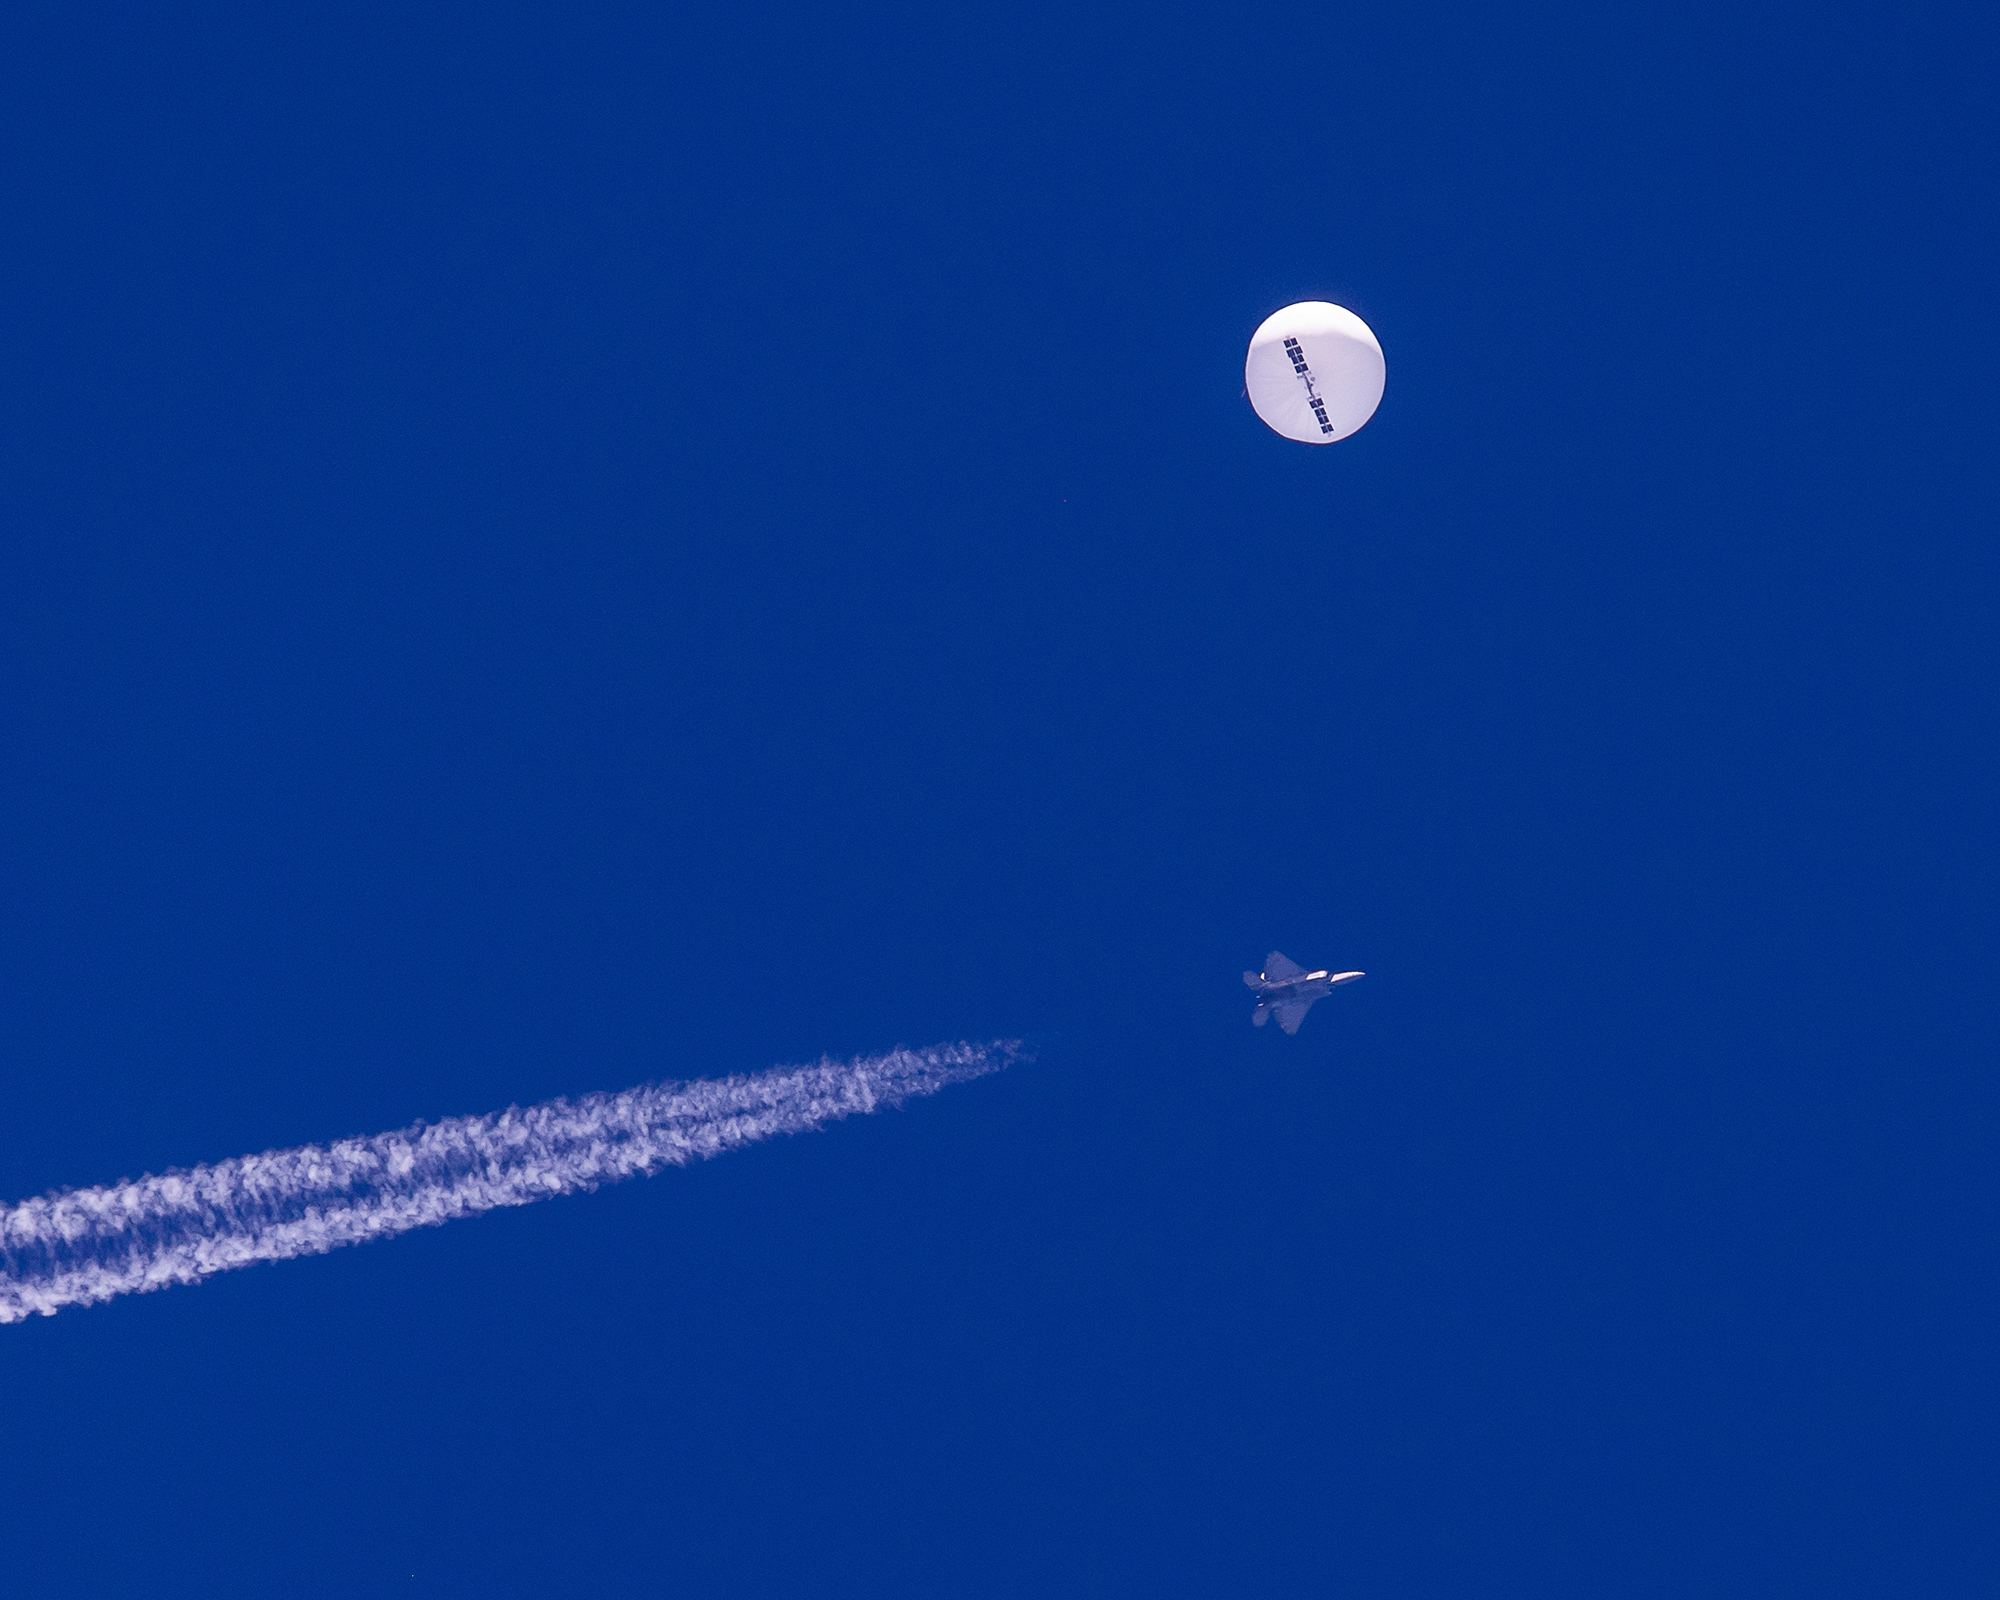 In this photo provided by Chad Fish, a large balloon drifts above the Atlantic Ocean, just off the coast of South Carolina, with a fighter jet and its contrail seen below it on Saturday, February 4. 